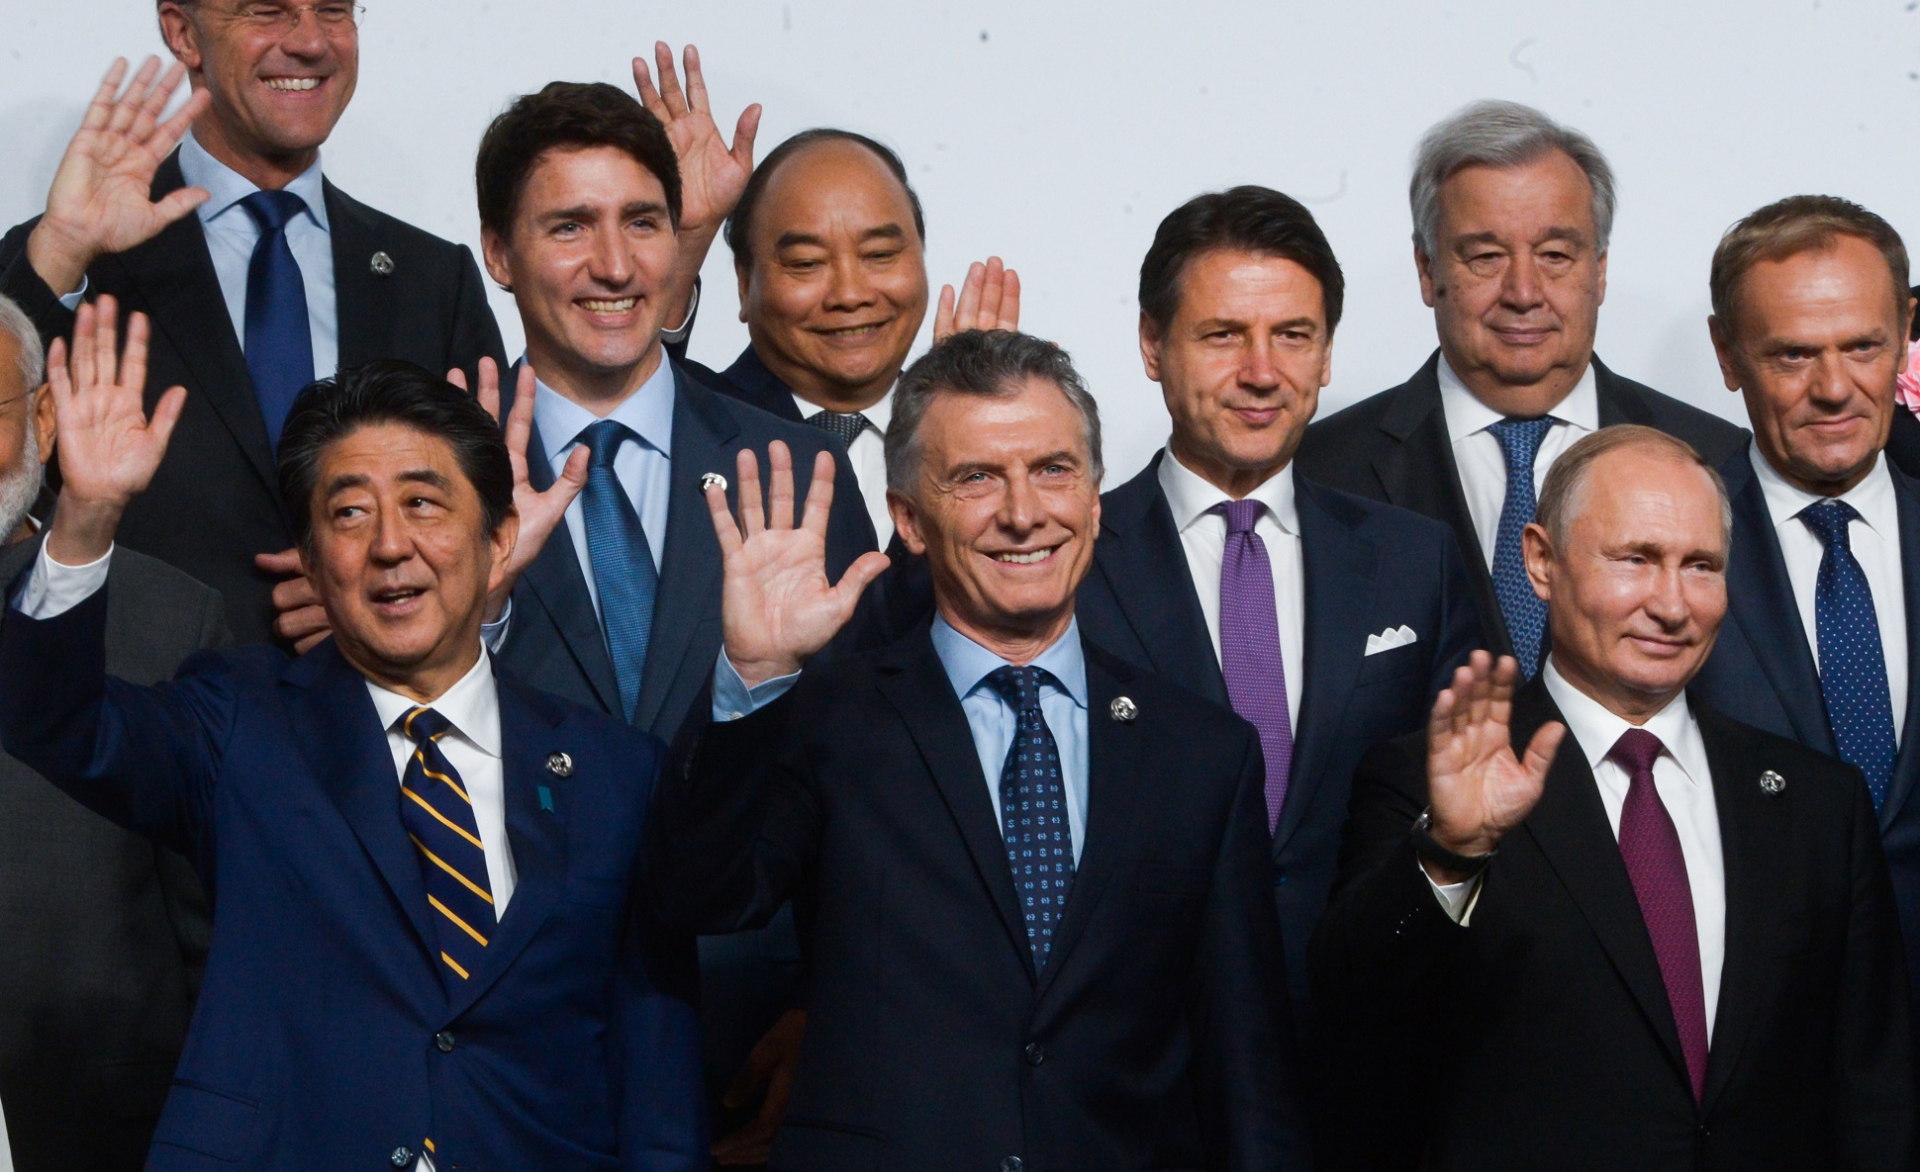 Macri at G20 Summit: “Widespread support from the international community has been crucial as we continue to consolidate our path of development and global integration”